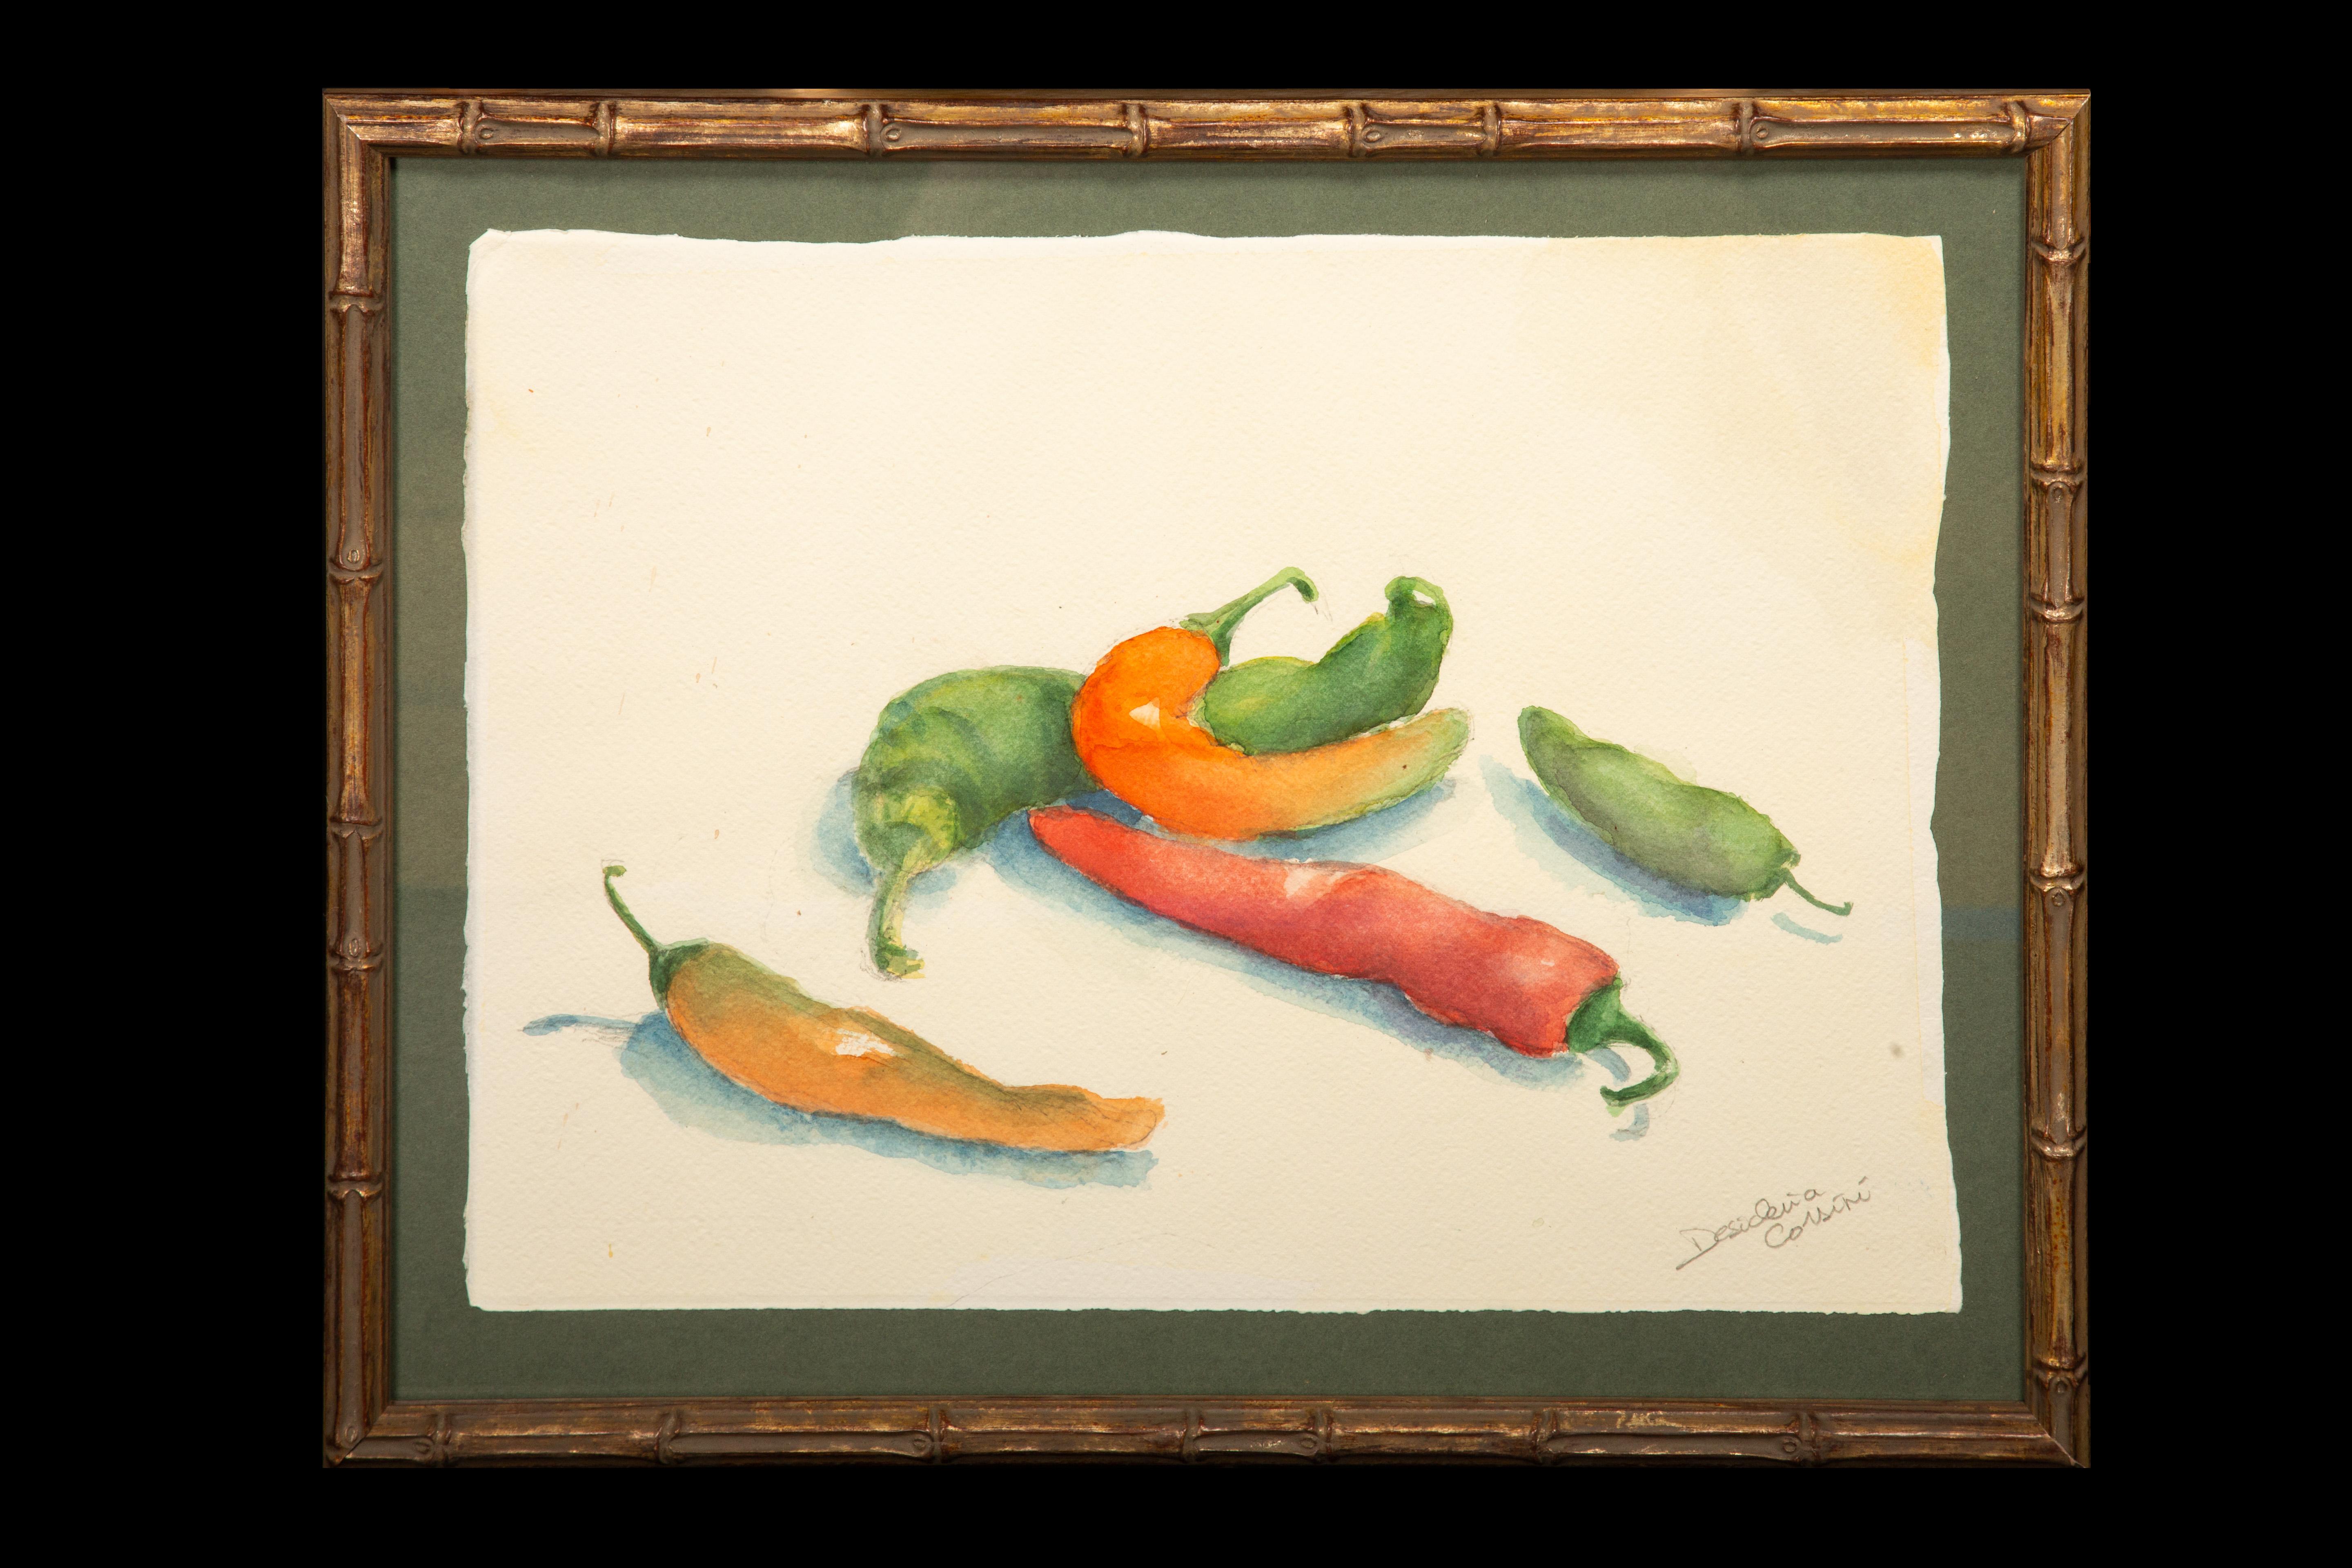 Wood Fruit and Veggie Watercolor Collection by Desideria Corsini For Sale